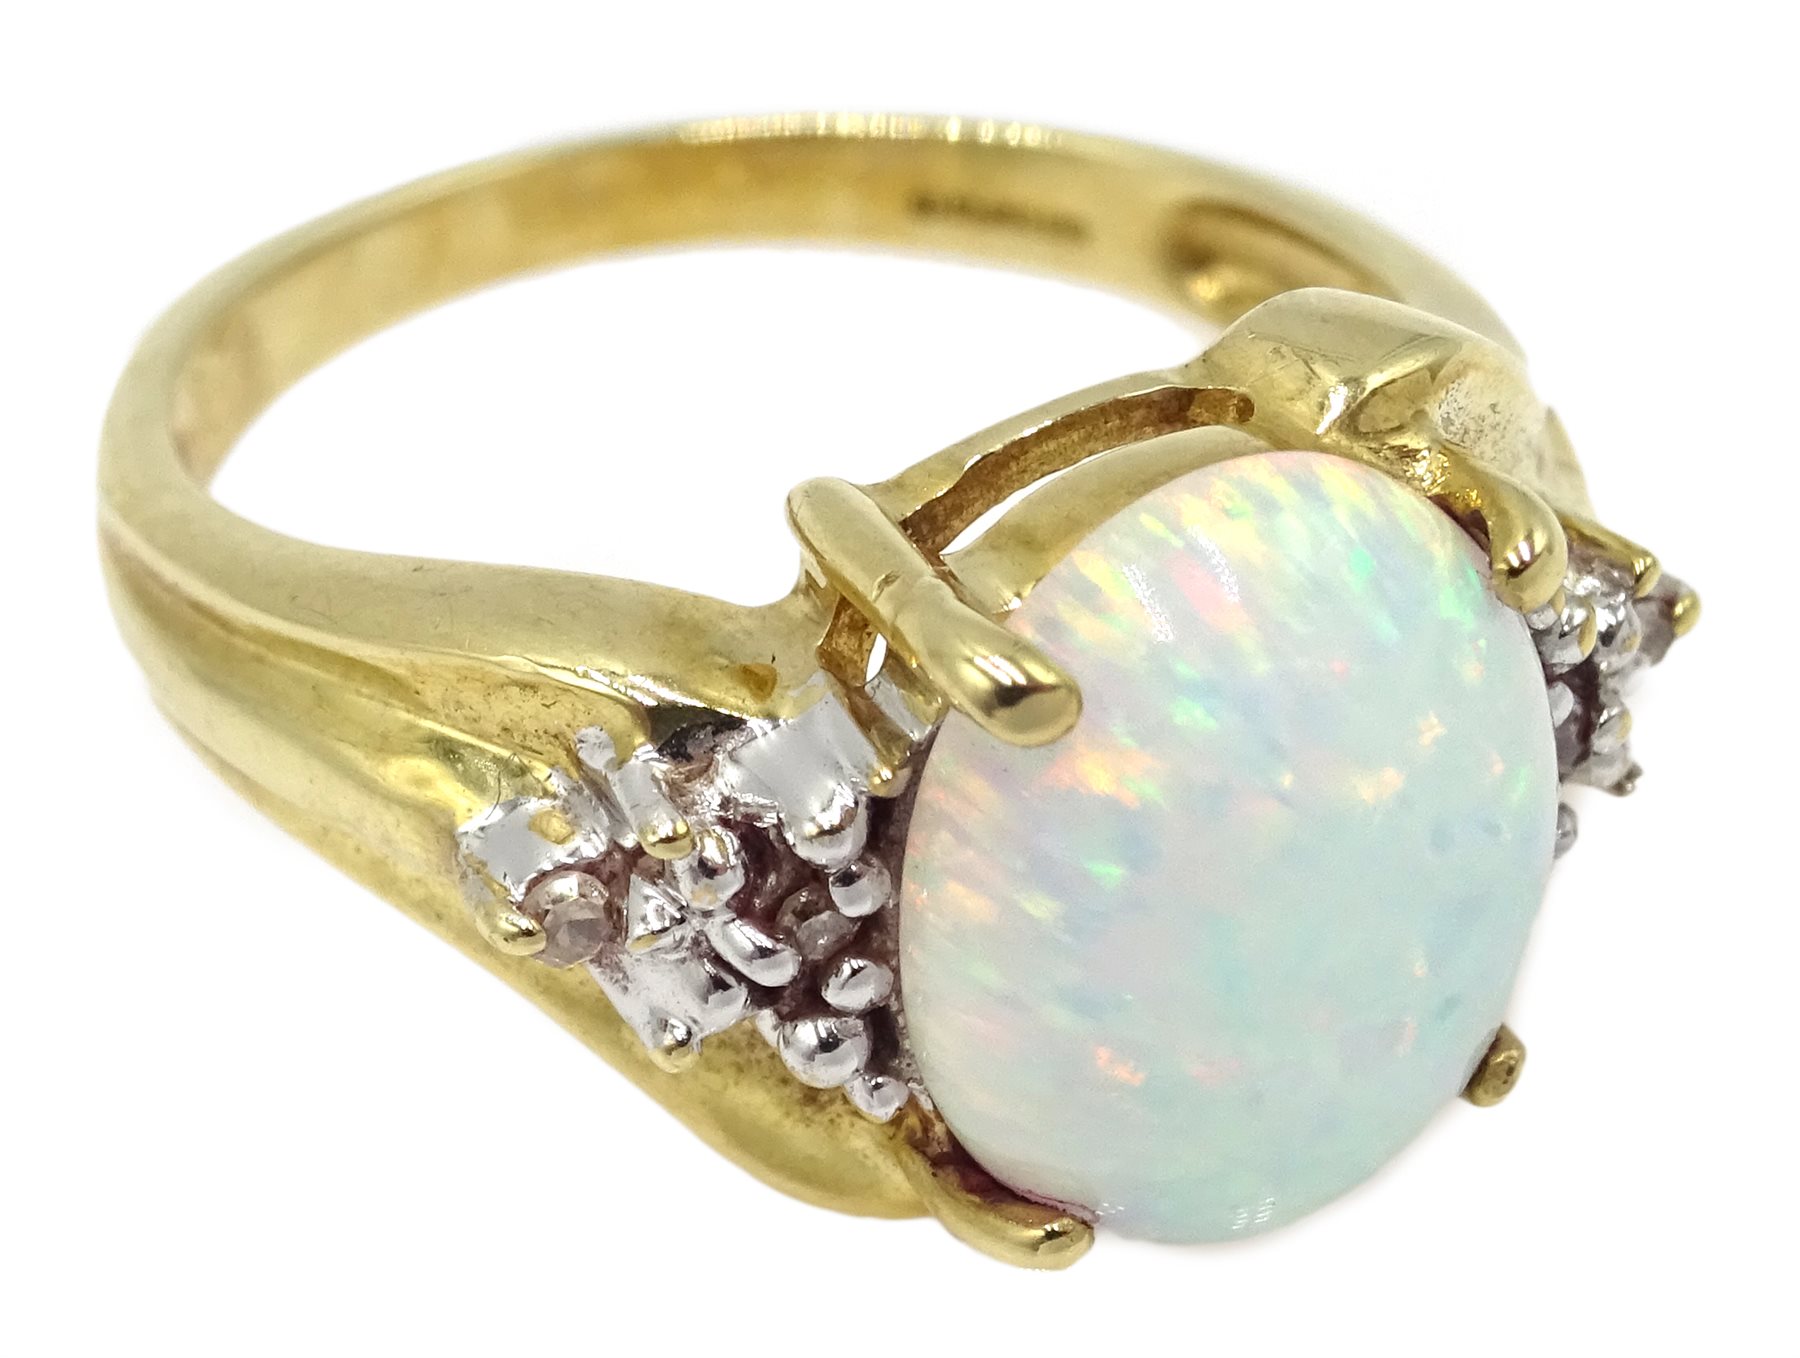 9ct gold opal and diamond ring, hallmarked - Jewellery, Watches & Silver